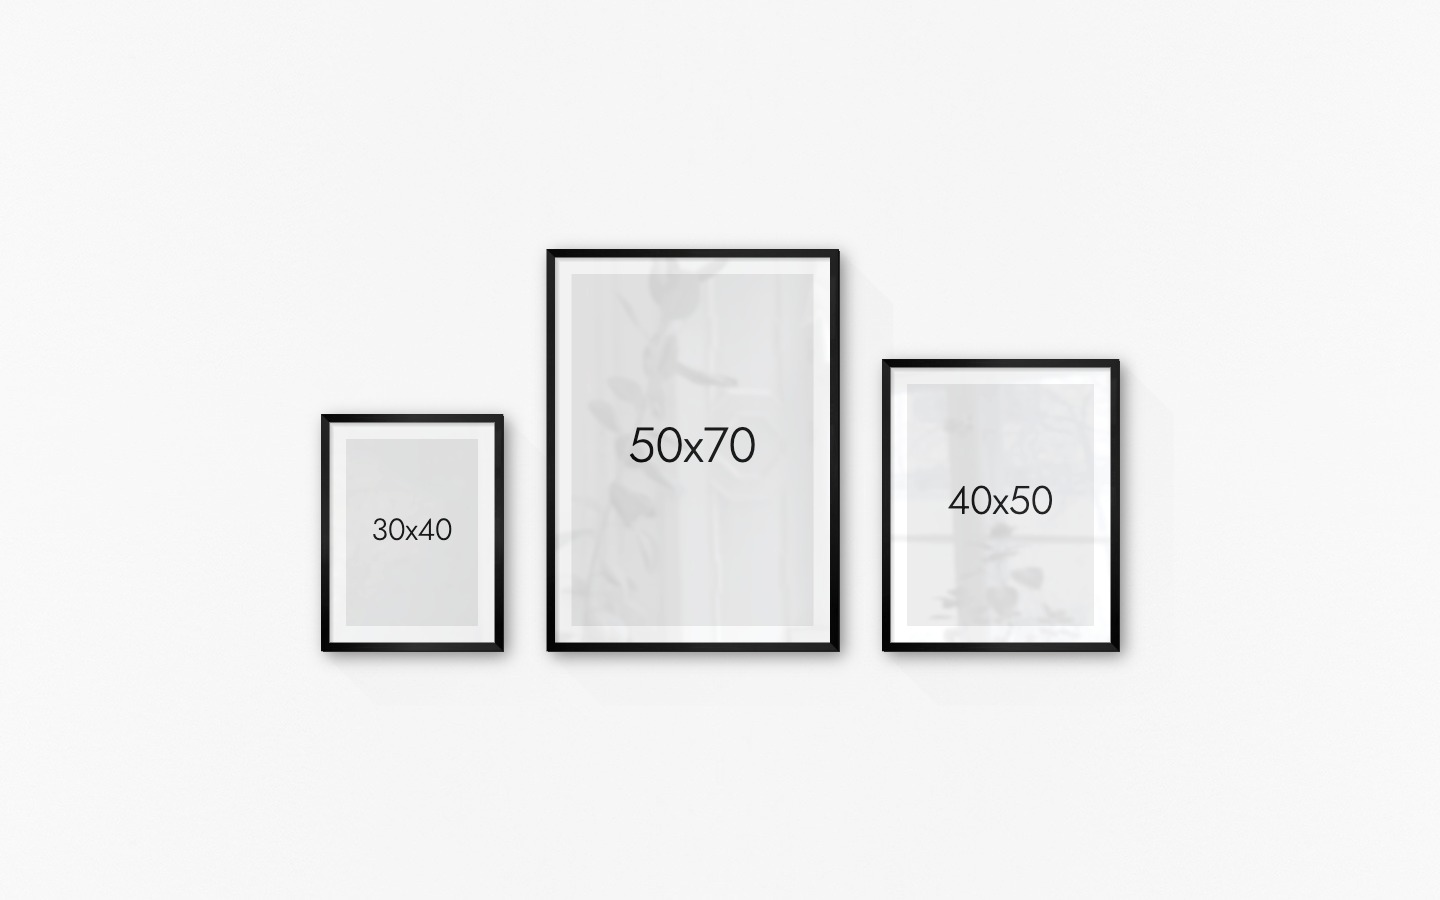 Gallery wall with picture frames in black in sizes 30x40, 50x70 and 40x50